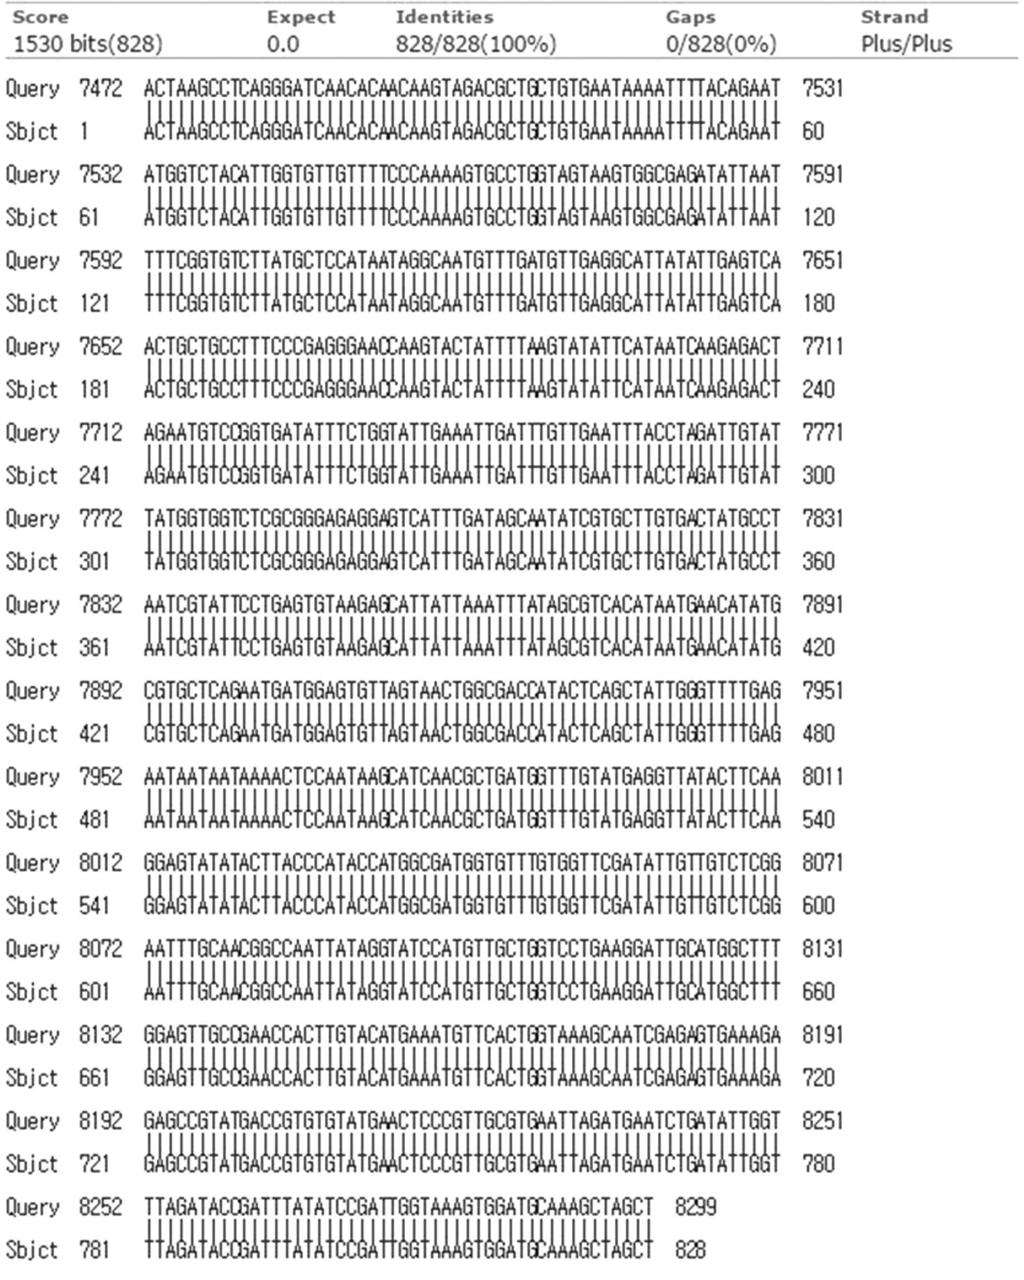 Fig. 6. DNA sequence homology between JX878305.1 and pbx DWV polyc3g. JX878305.1 is complete nucleotides of DWV deposited in GenBank.